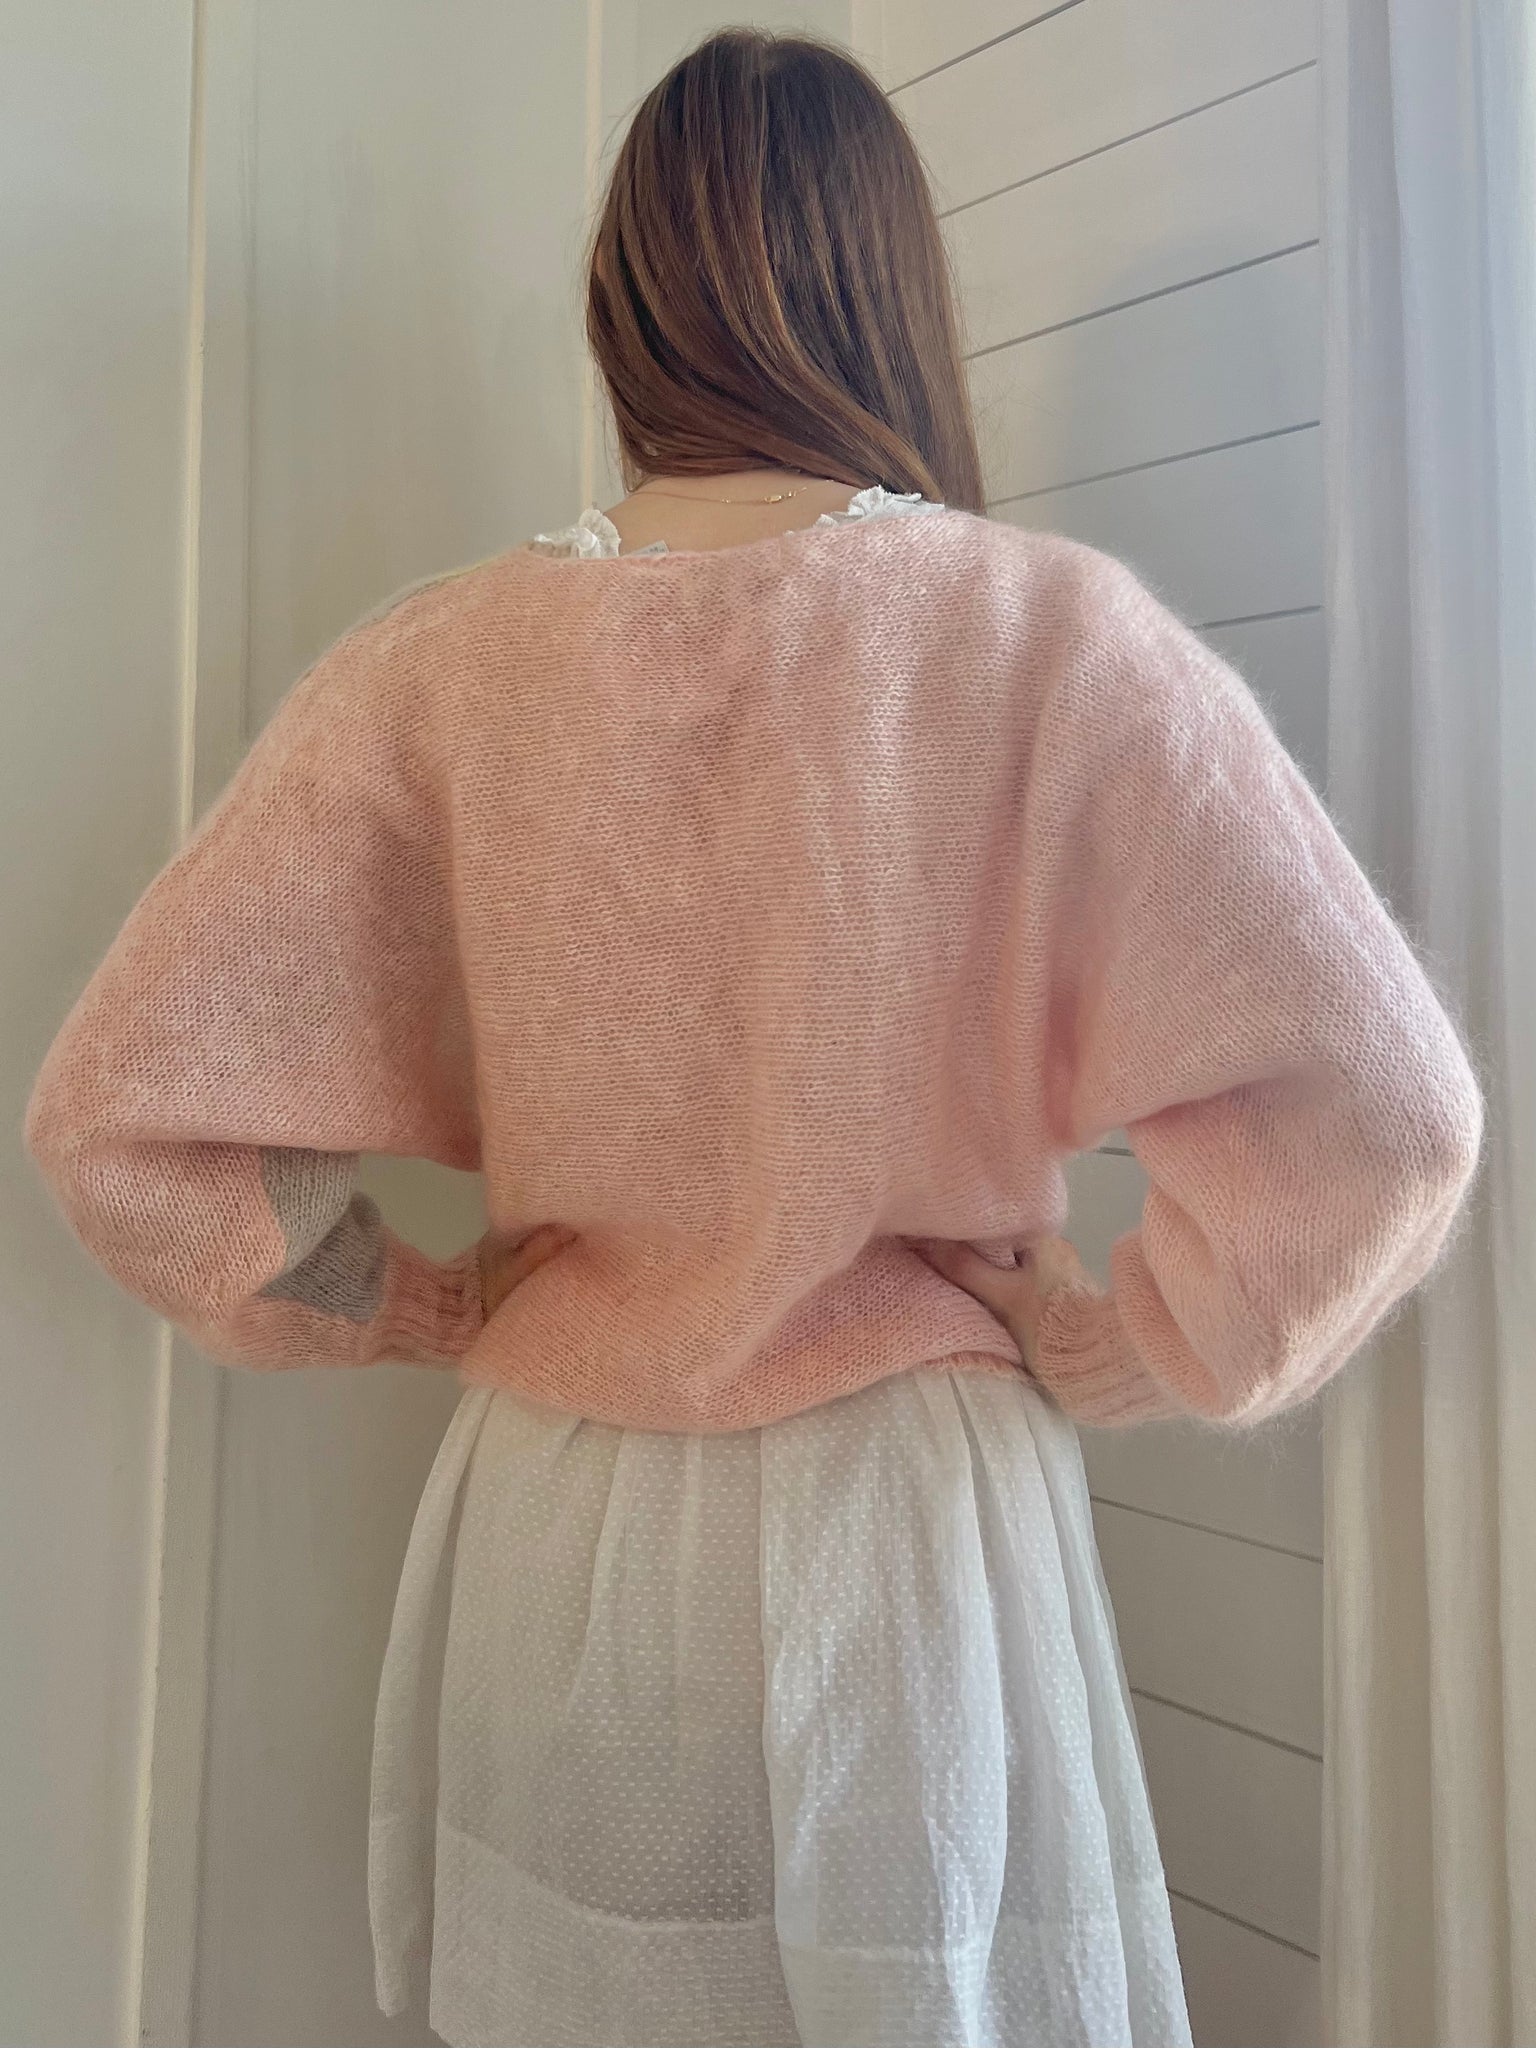 1980s Mohair Pastel Pink Pullover Sweater with Giant Lavender and Green Flower